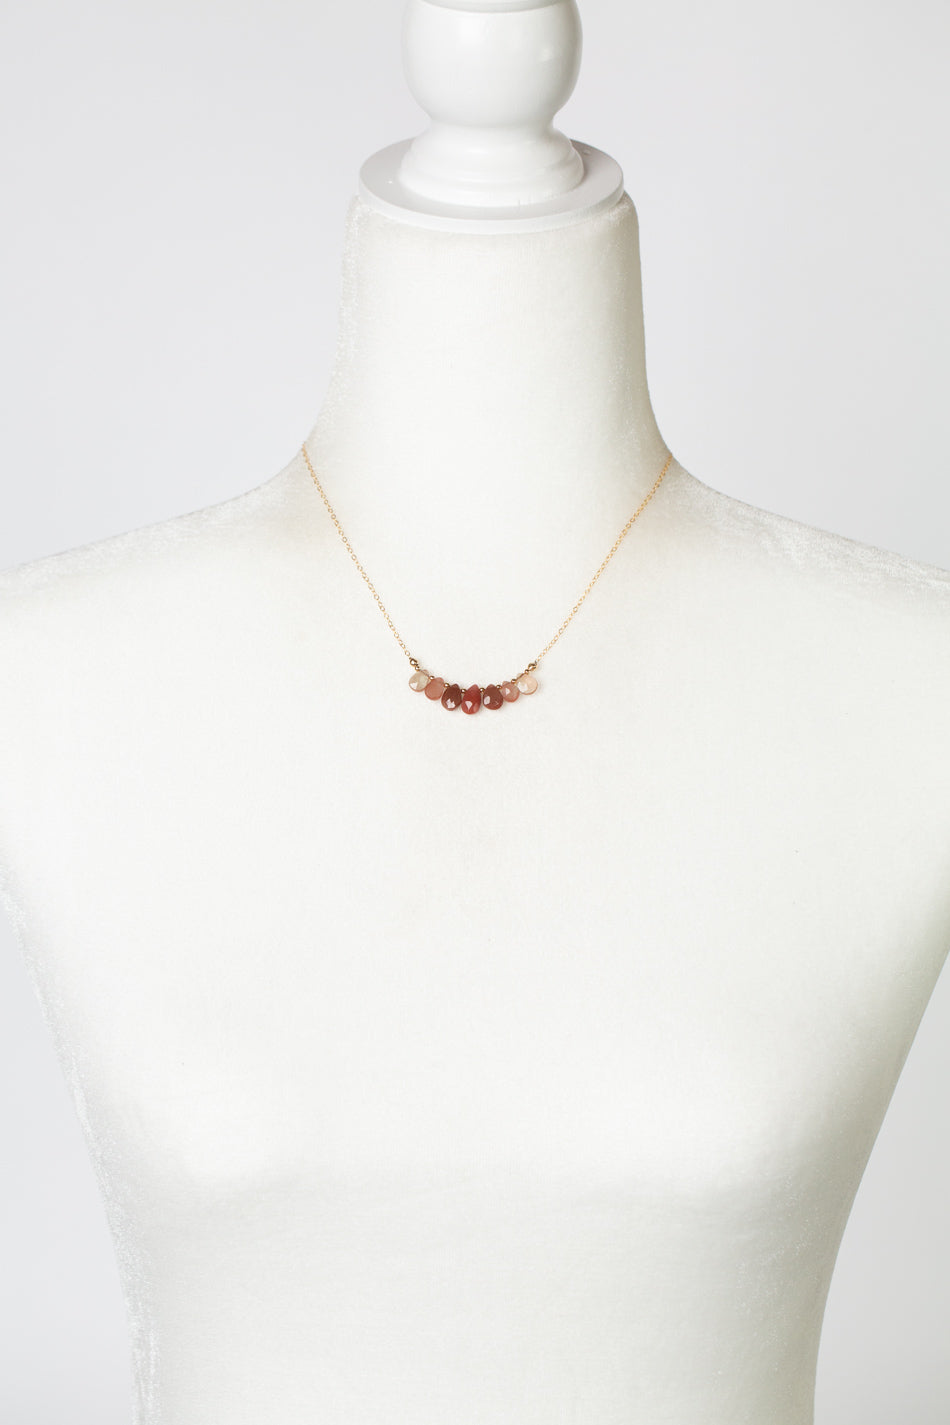 Divinity 15.5-17.5" Faceted Andesine Briolettes Simple Necklace